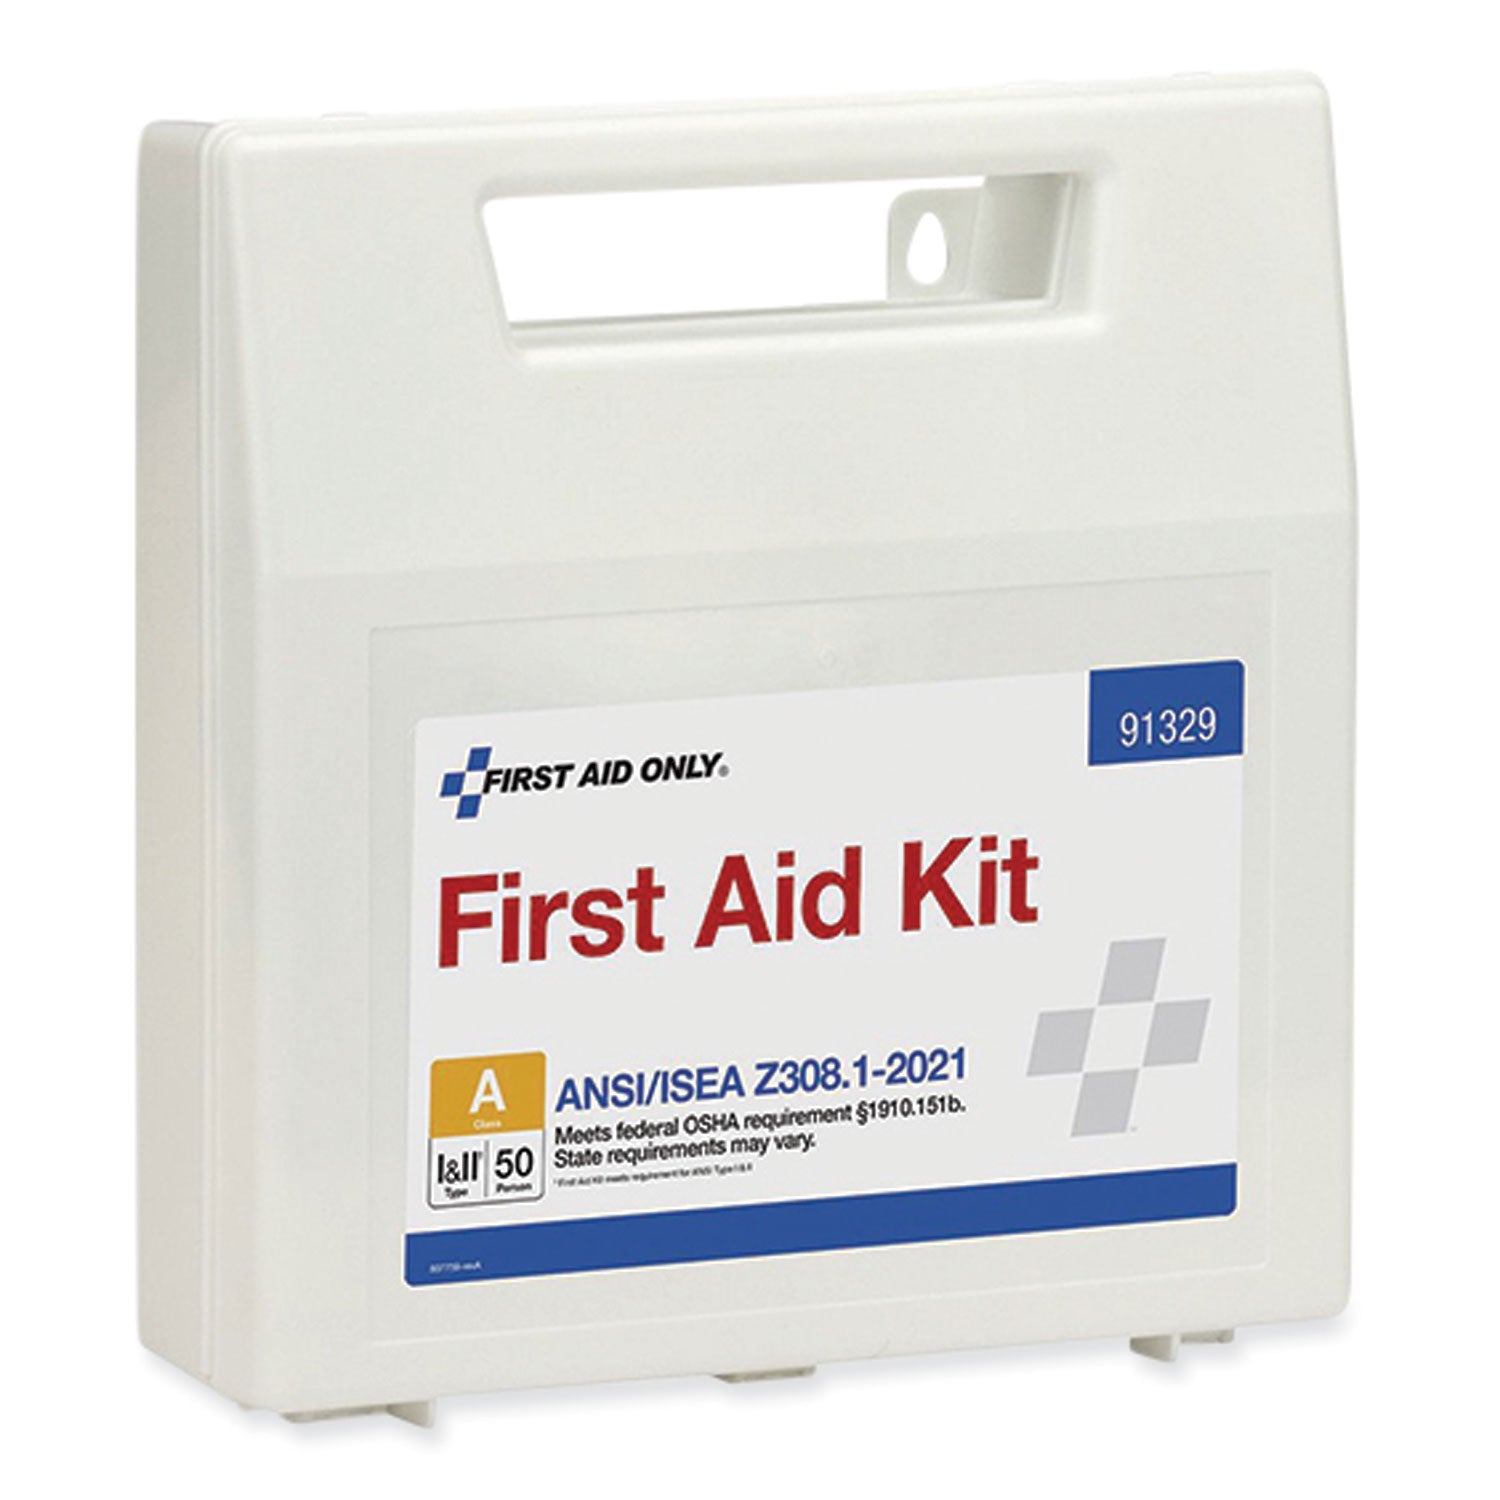 ansi-2021-first-aid-kit-for-50-people-184-pieces-plastic-case_fao91329 - 2